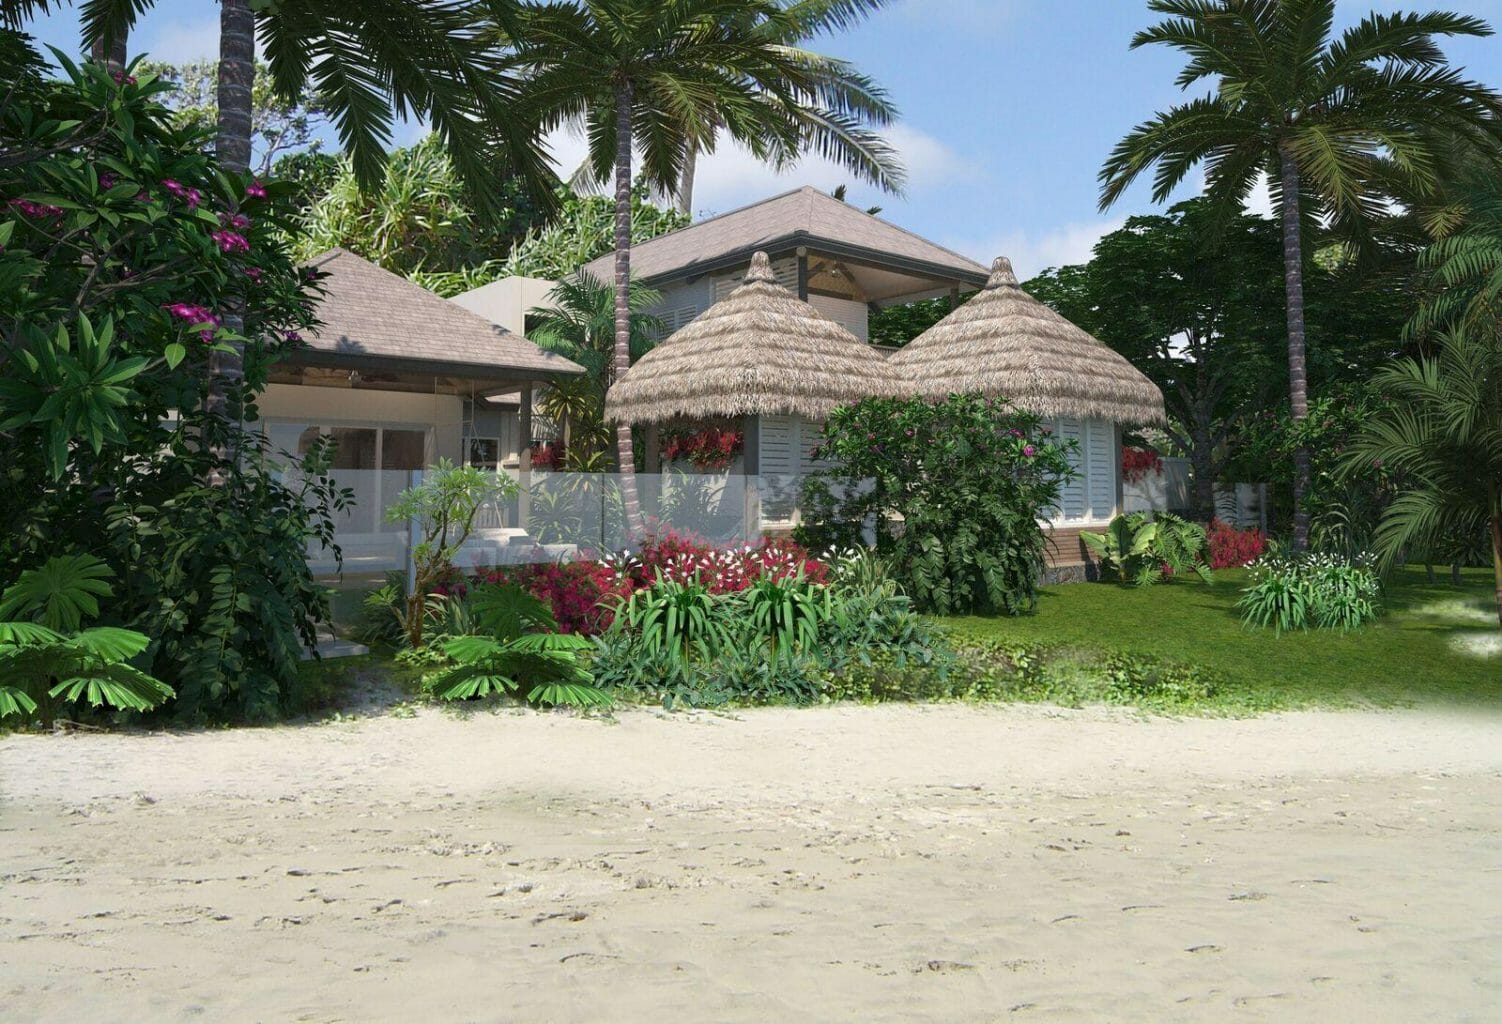 View of thatched-roof villas from sandy beach